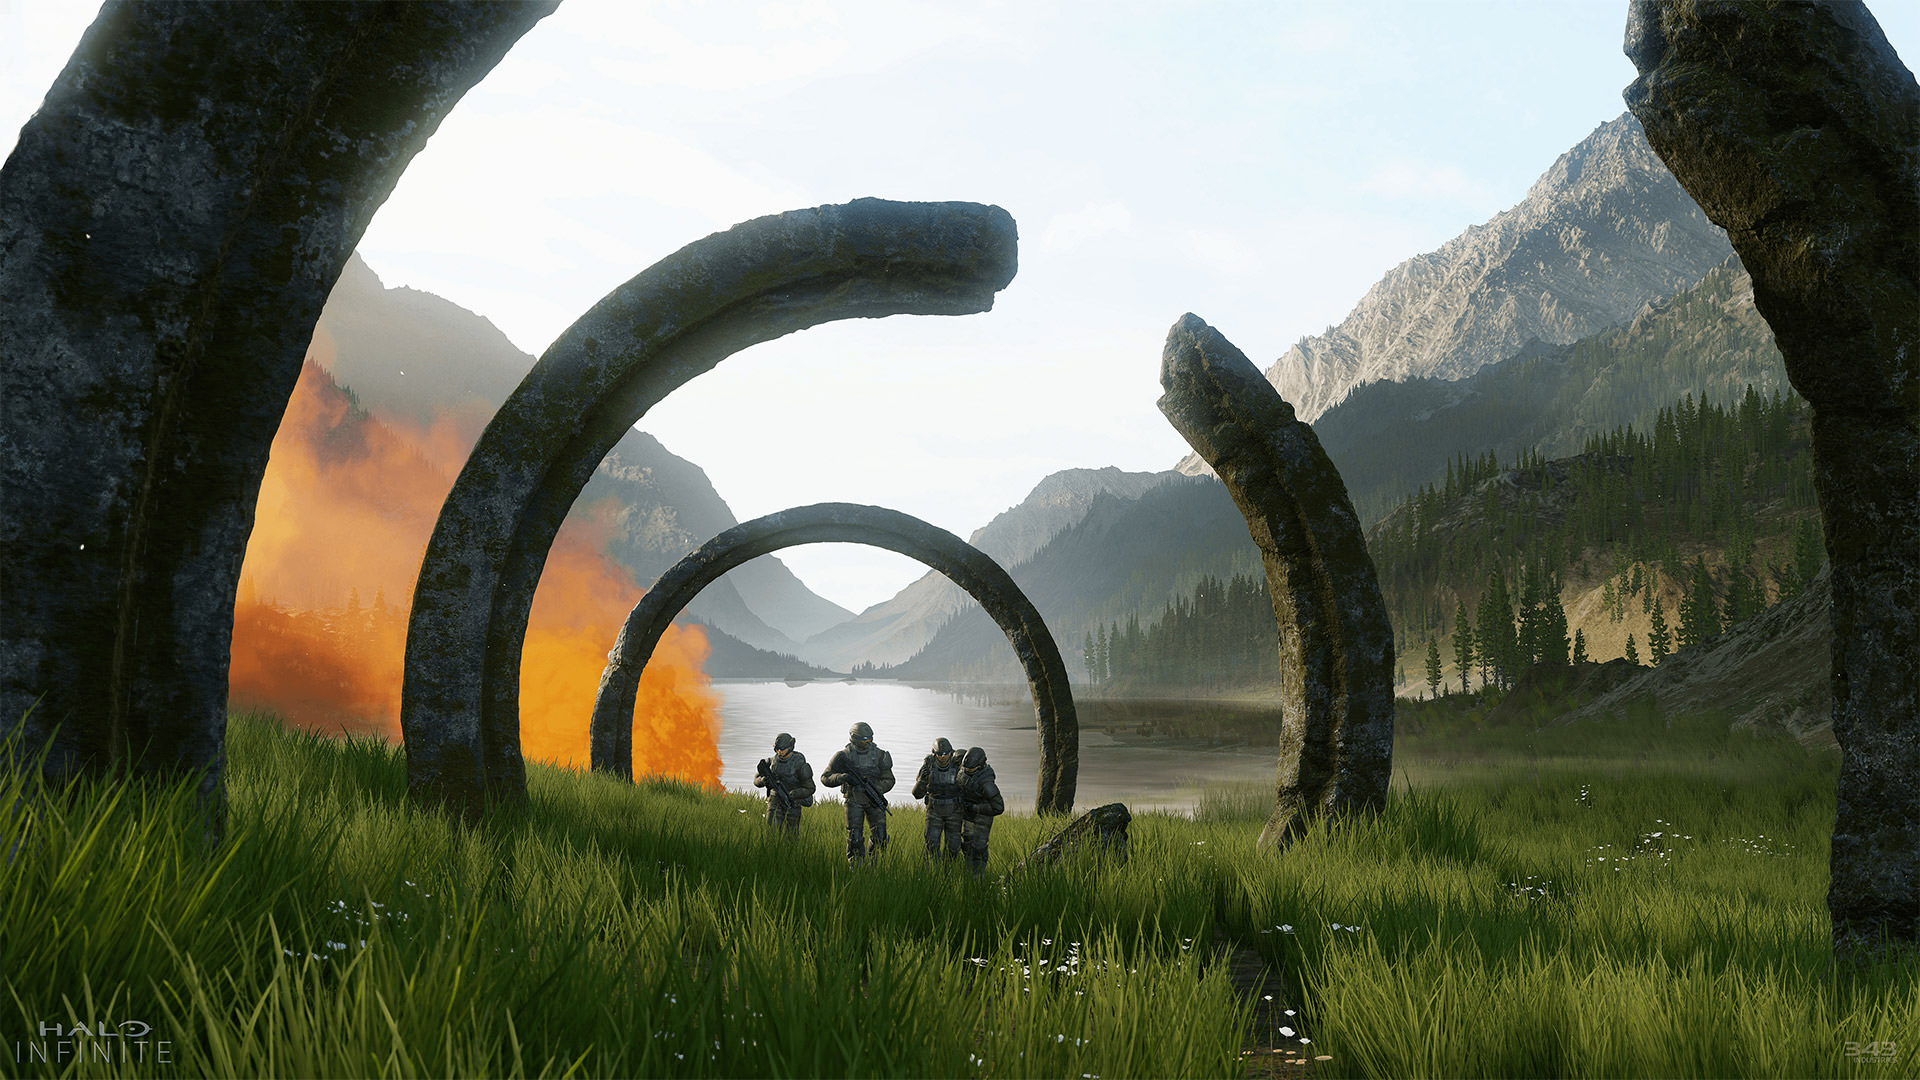 halo infinite characters environment  Image of halo infinite characters environment